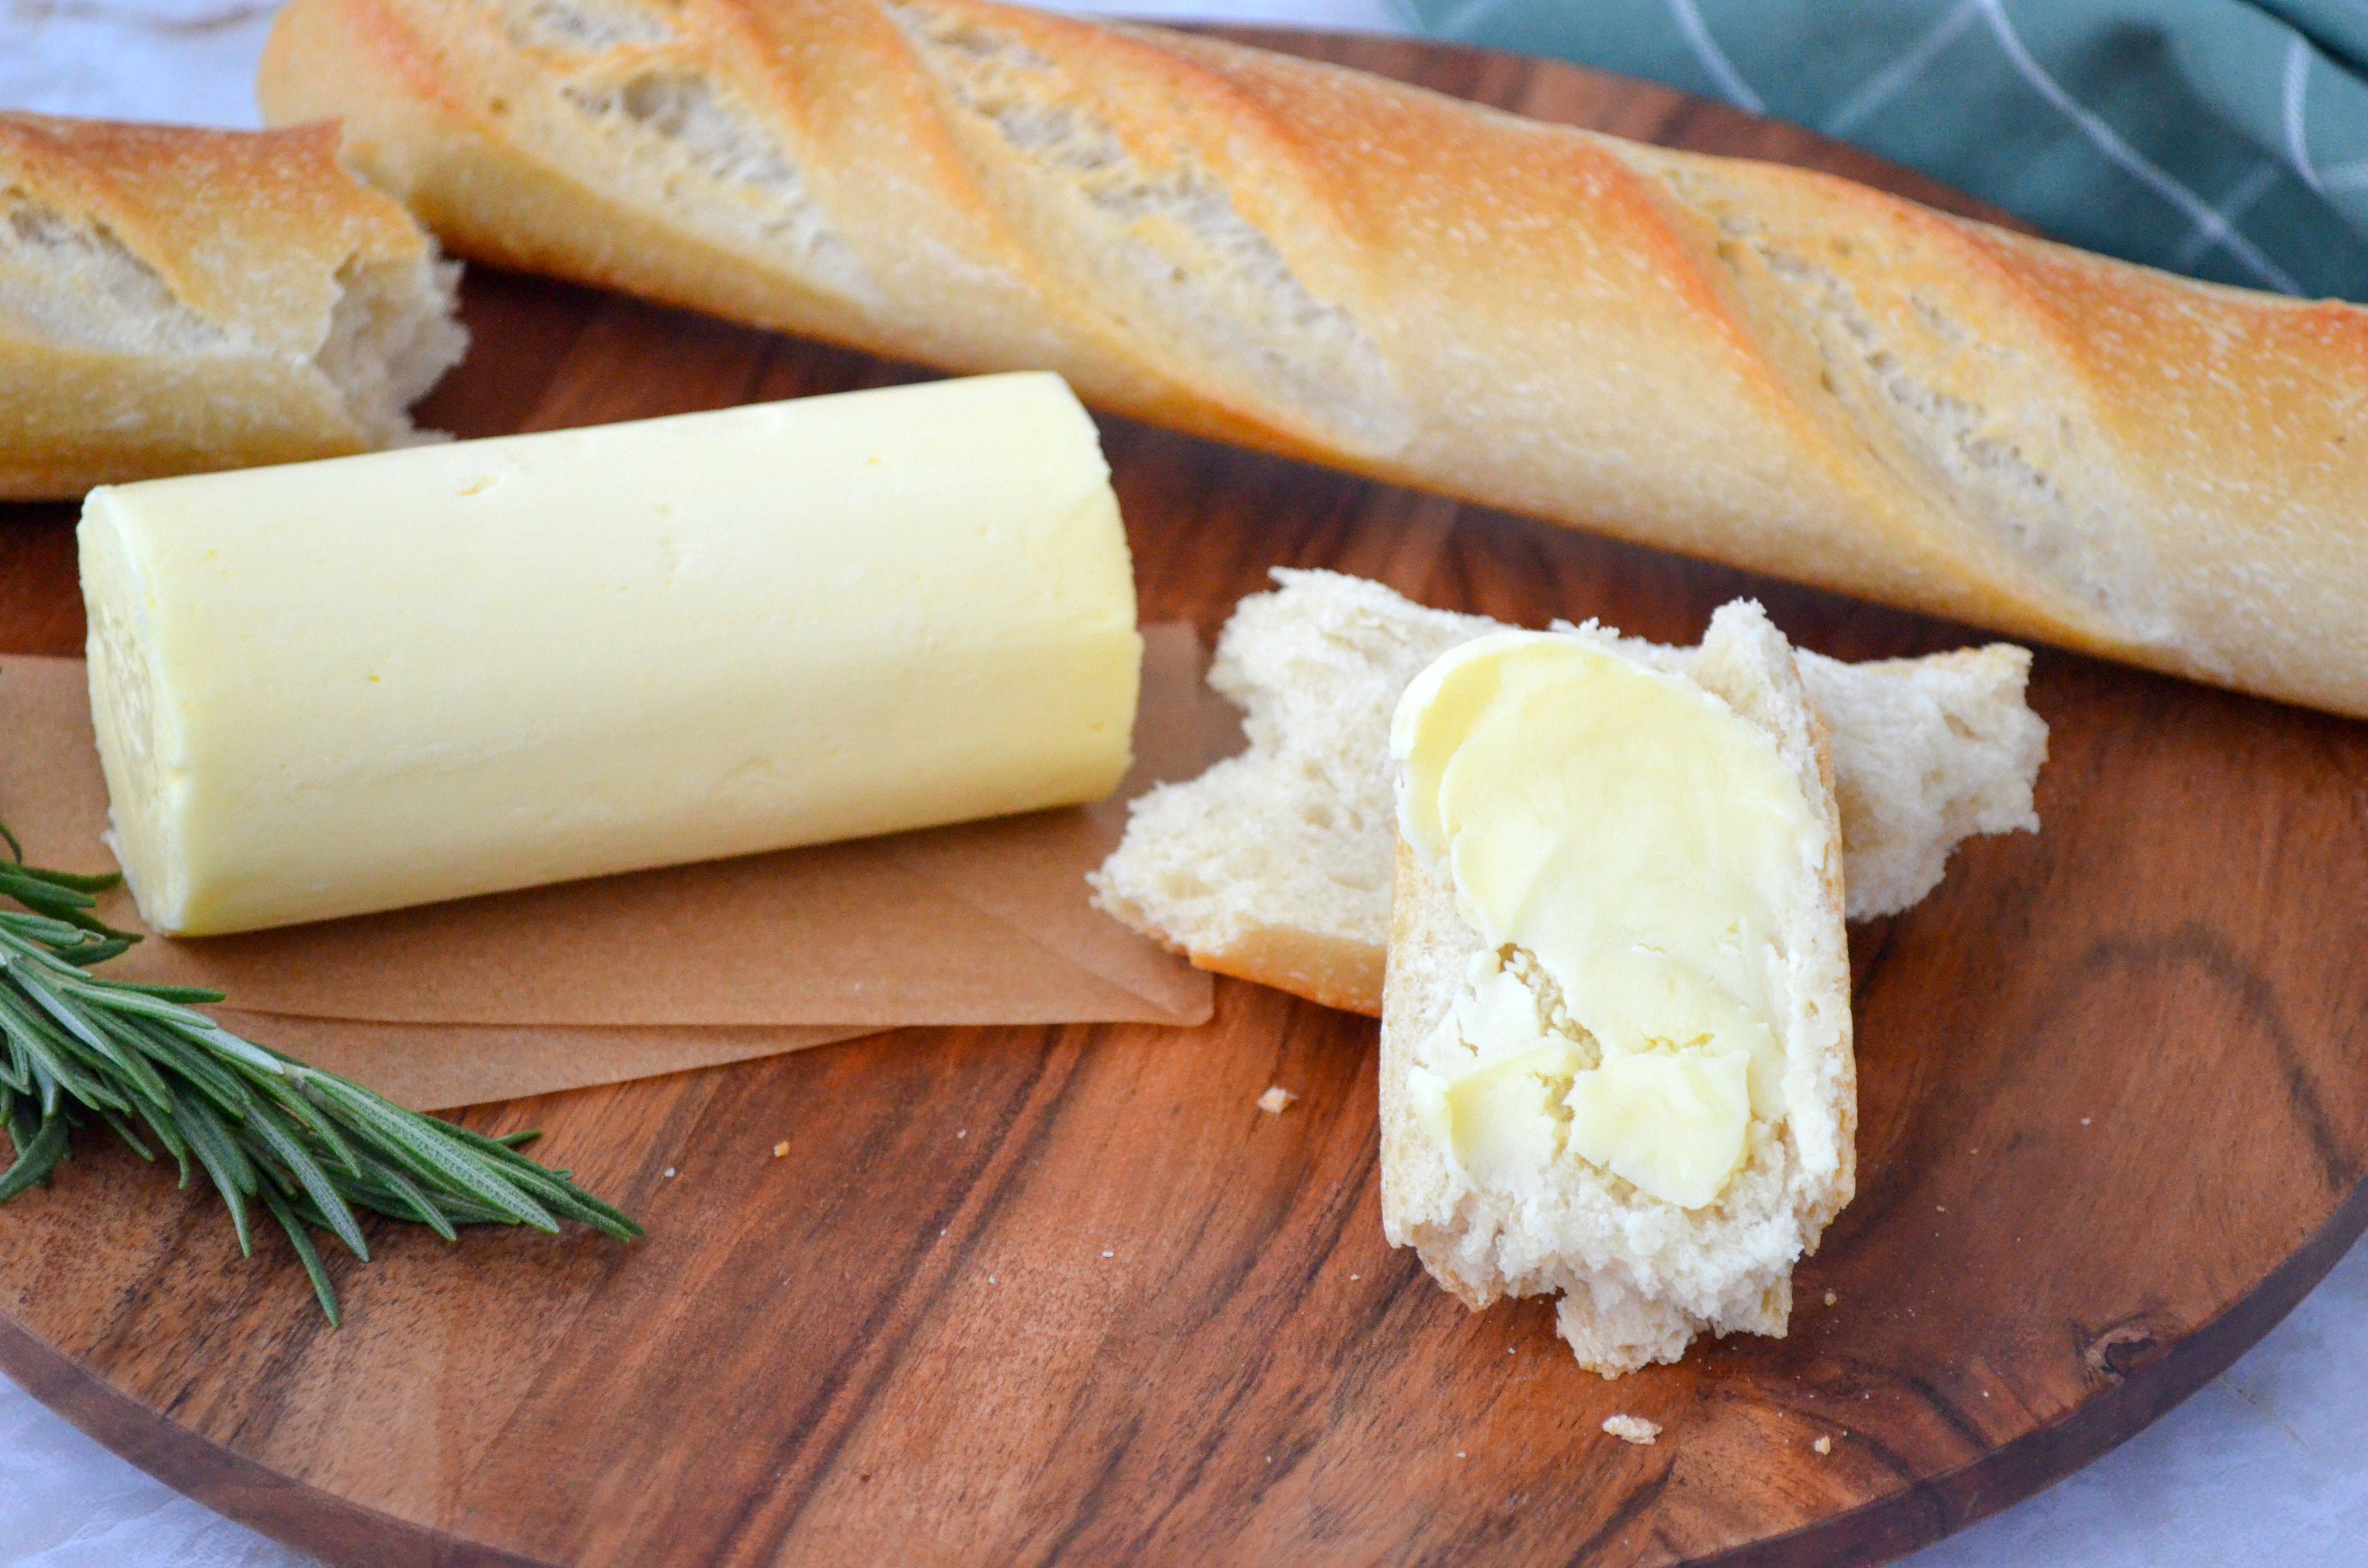 Royal Guernsey artisan salted butter on bread